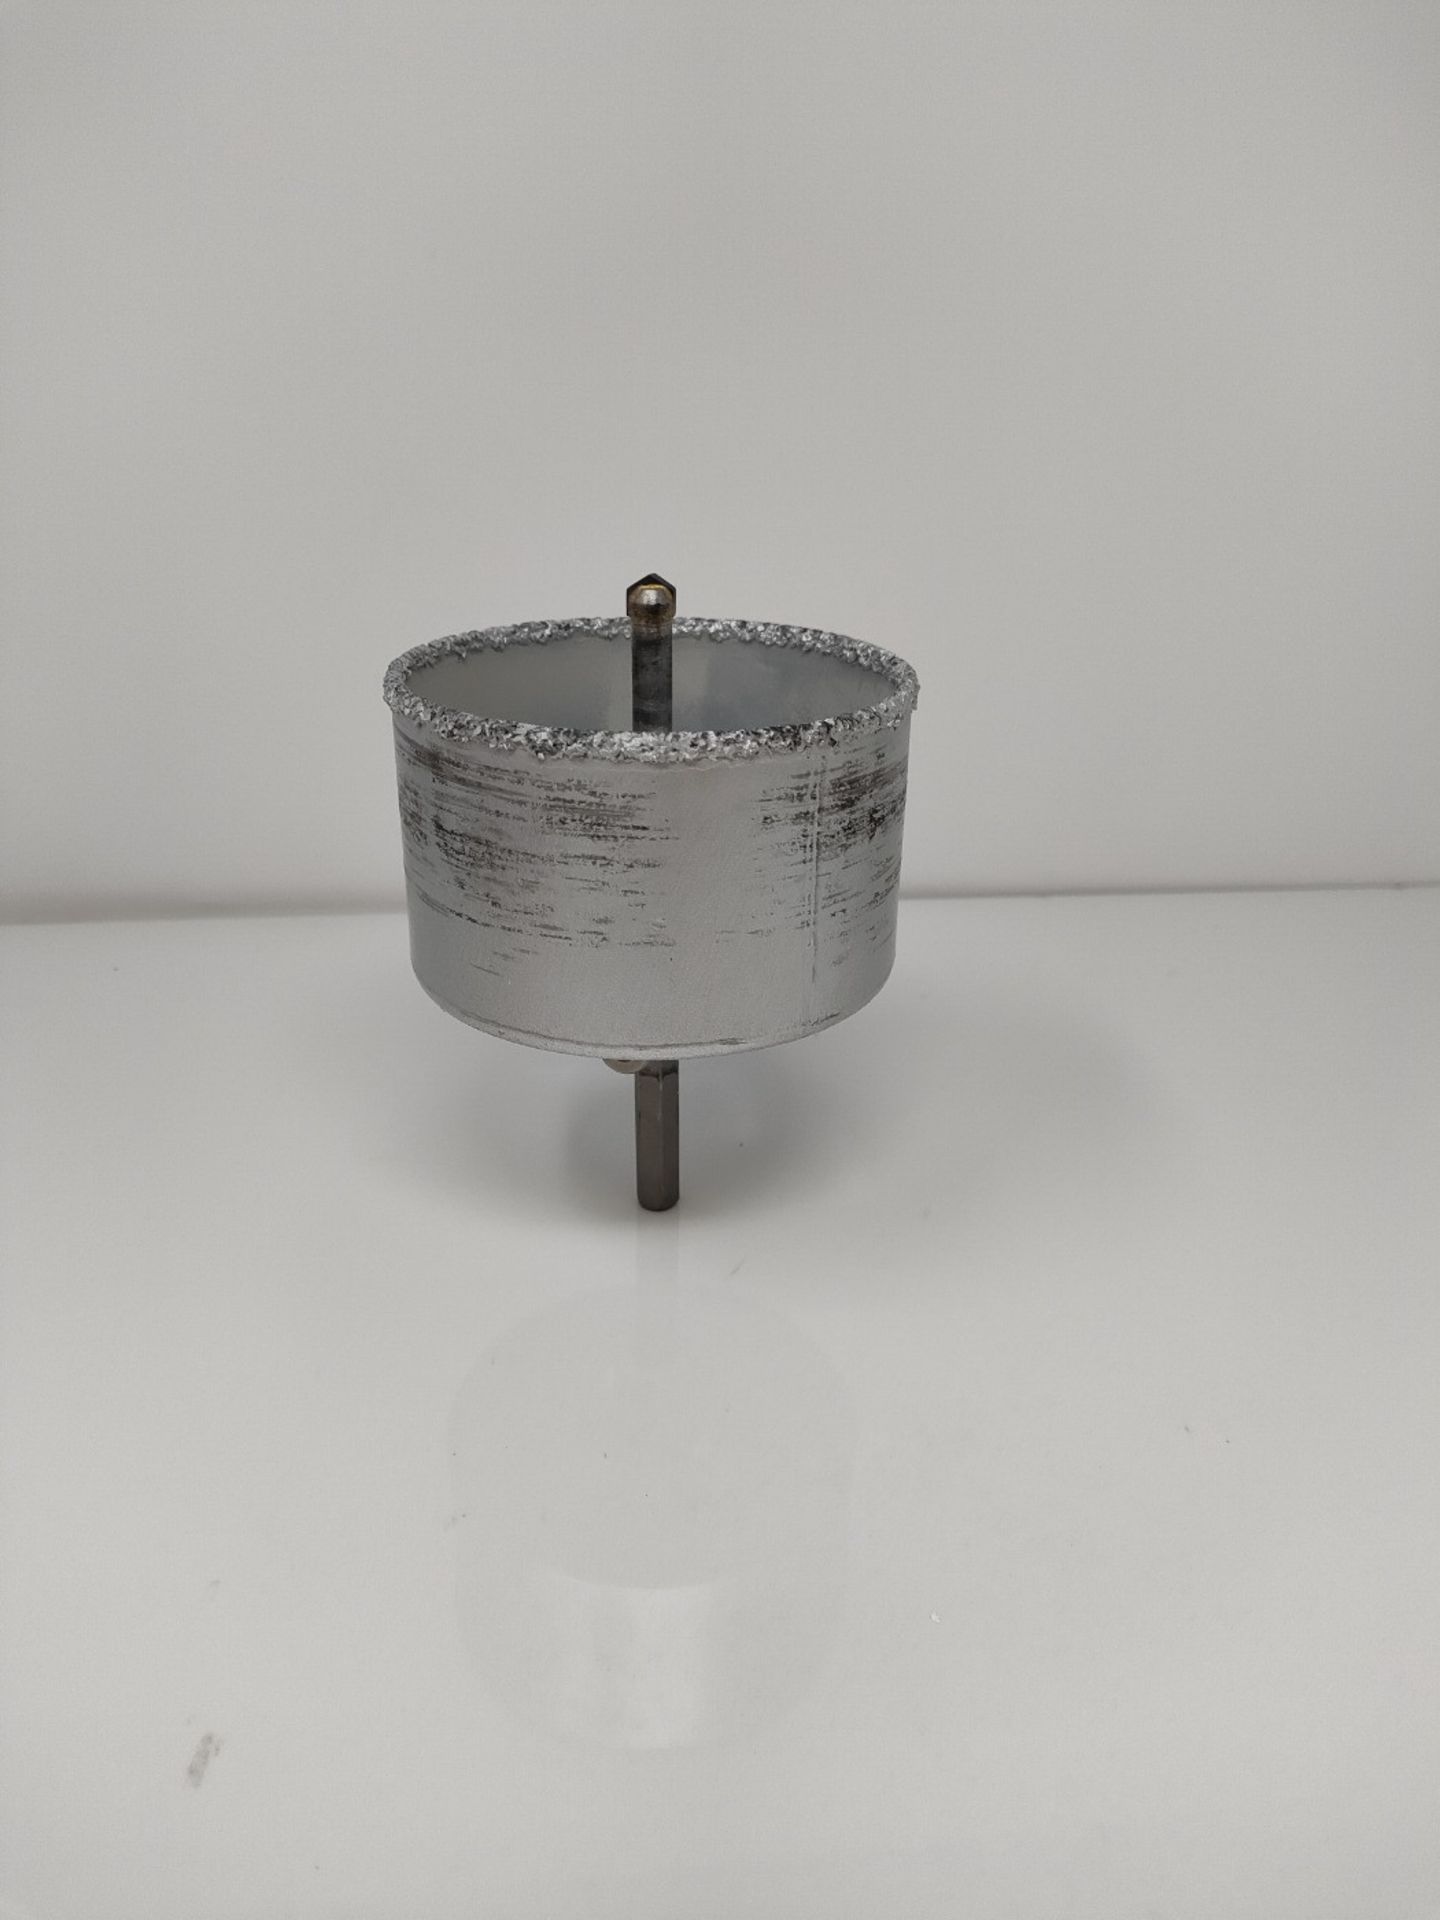 wolfcraft Annular Bit, Tungsten Carbide Coated, With Mandrel I 8913000 I For socket an - Image 2 of 2